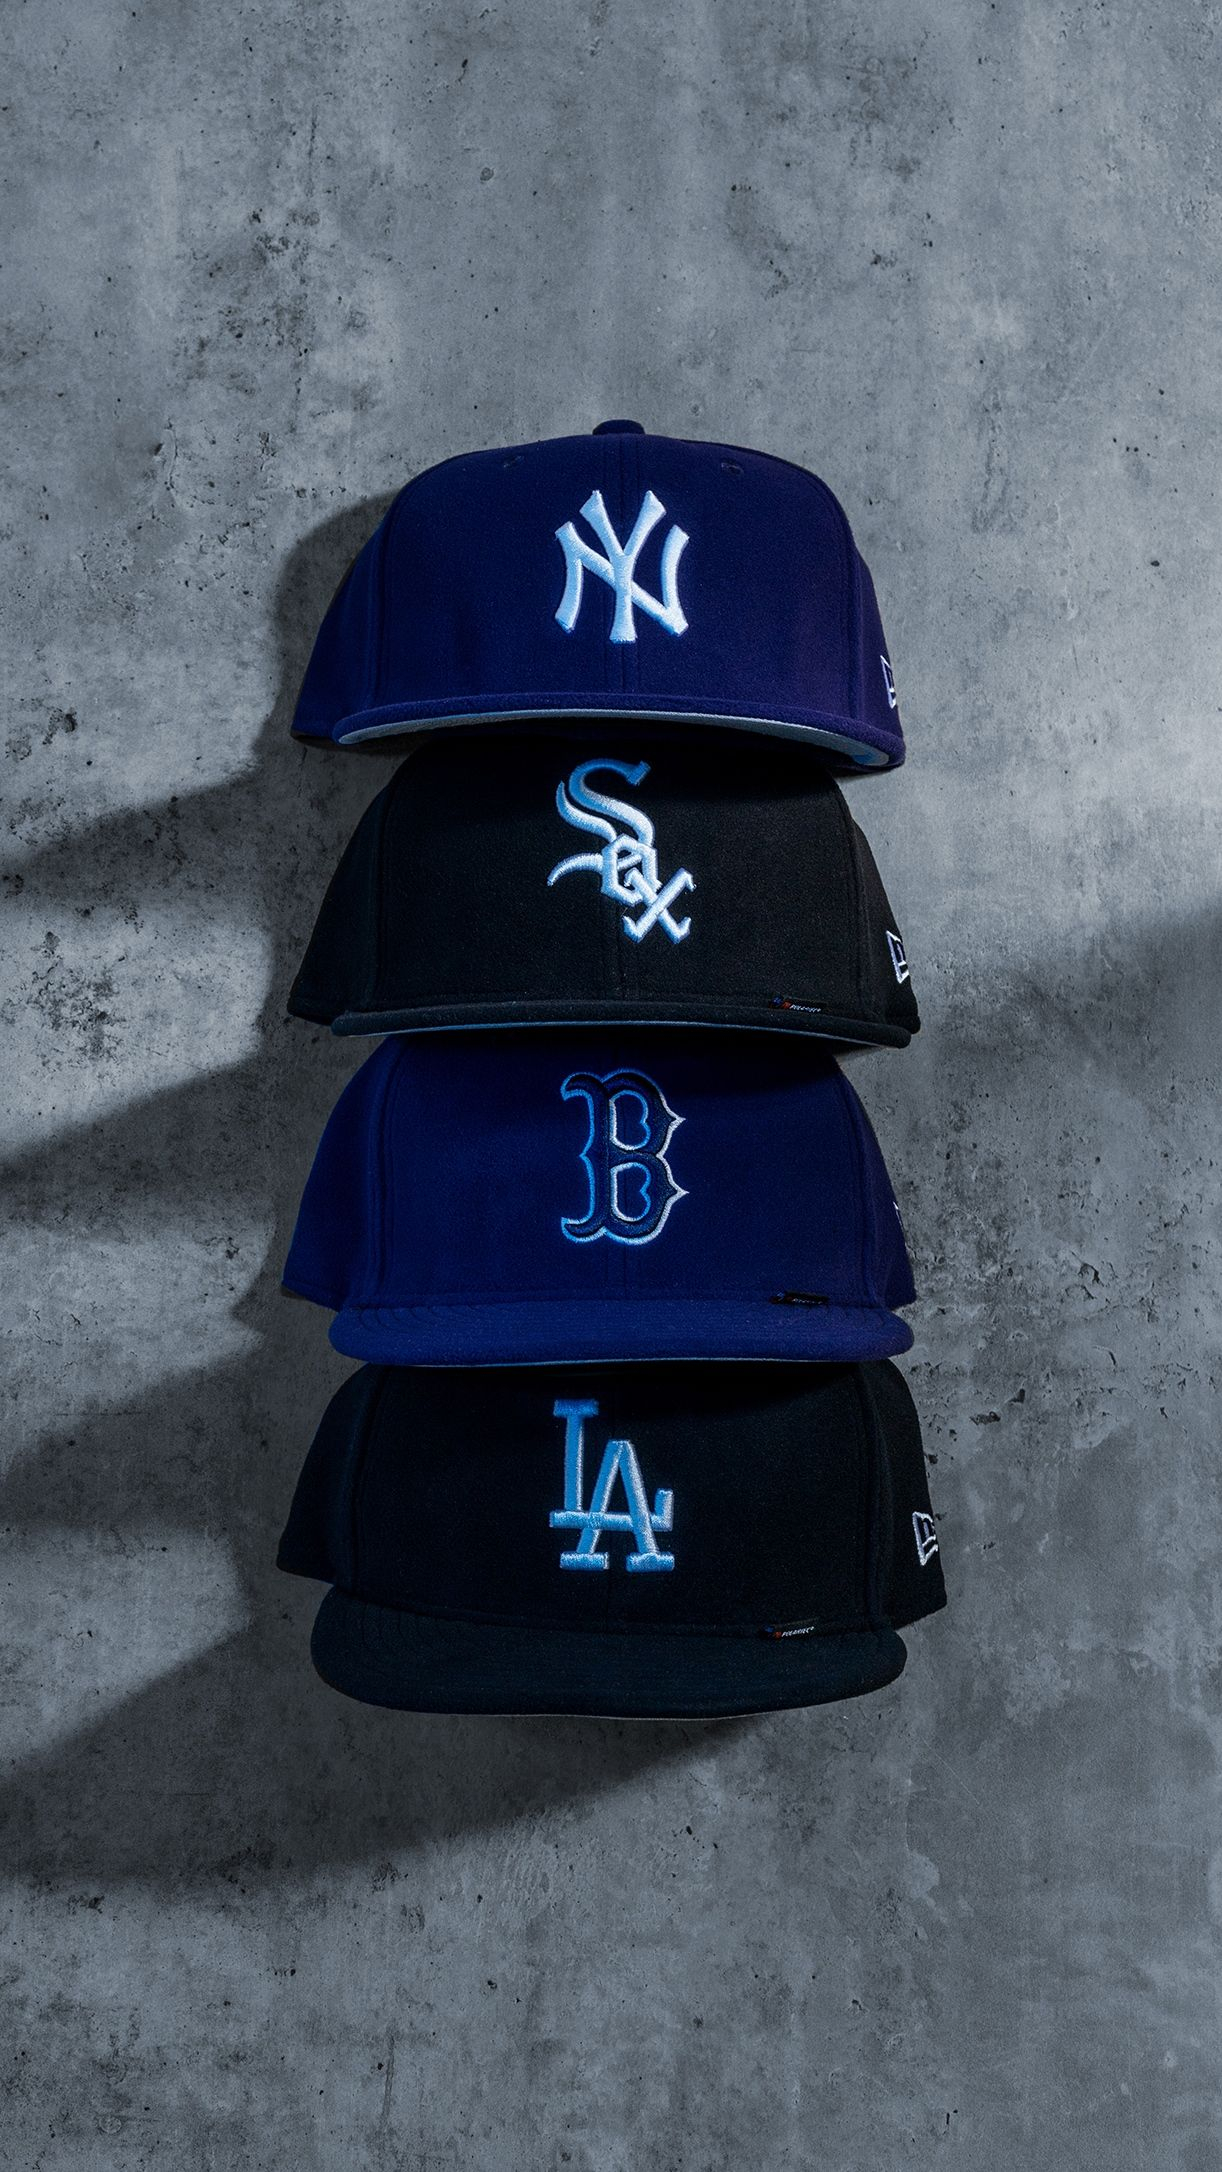 1222x2172 Which New Era Hat is your favorite? &eth;&#159;&#145;&#128; The latest delivery from New Era is now available at all retail locations + onl&acirc;&#128;&brvbar; in 2022 | Swag hats, New era hat, Custom fitted hats